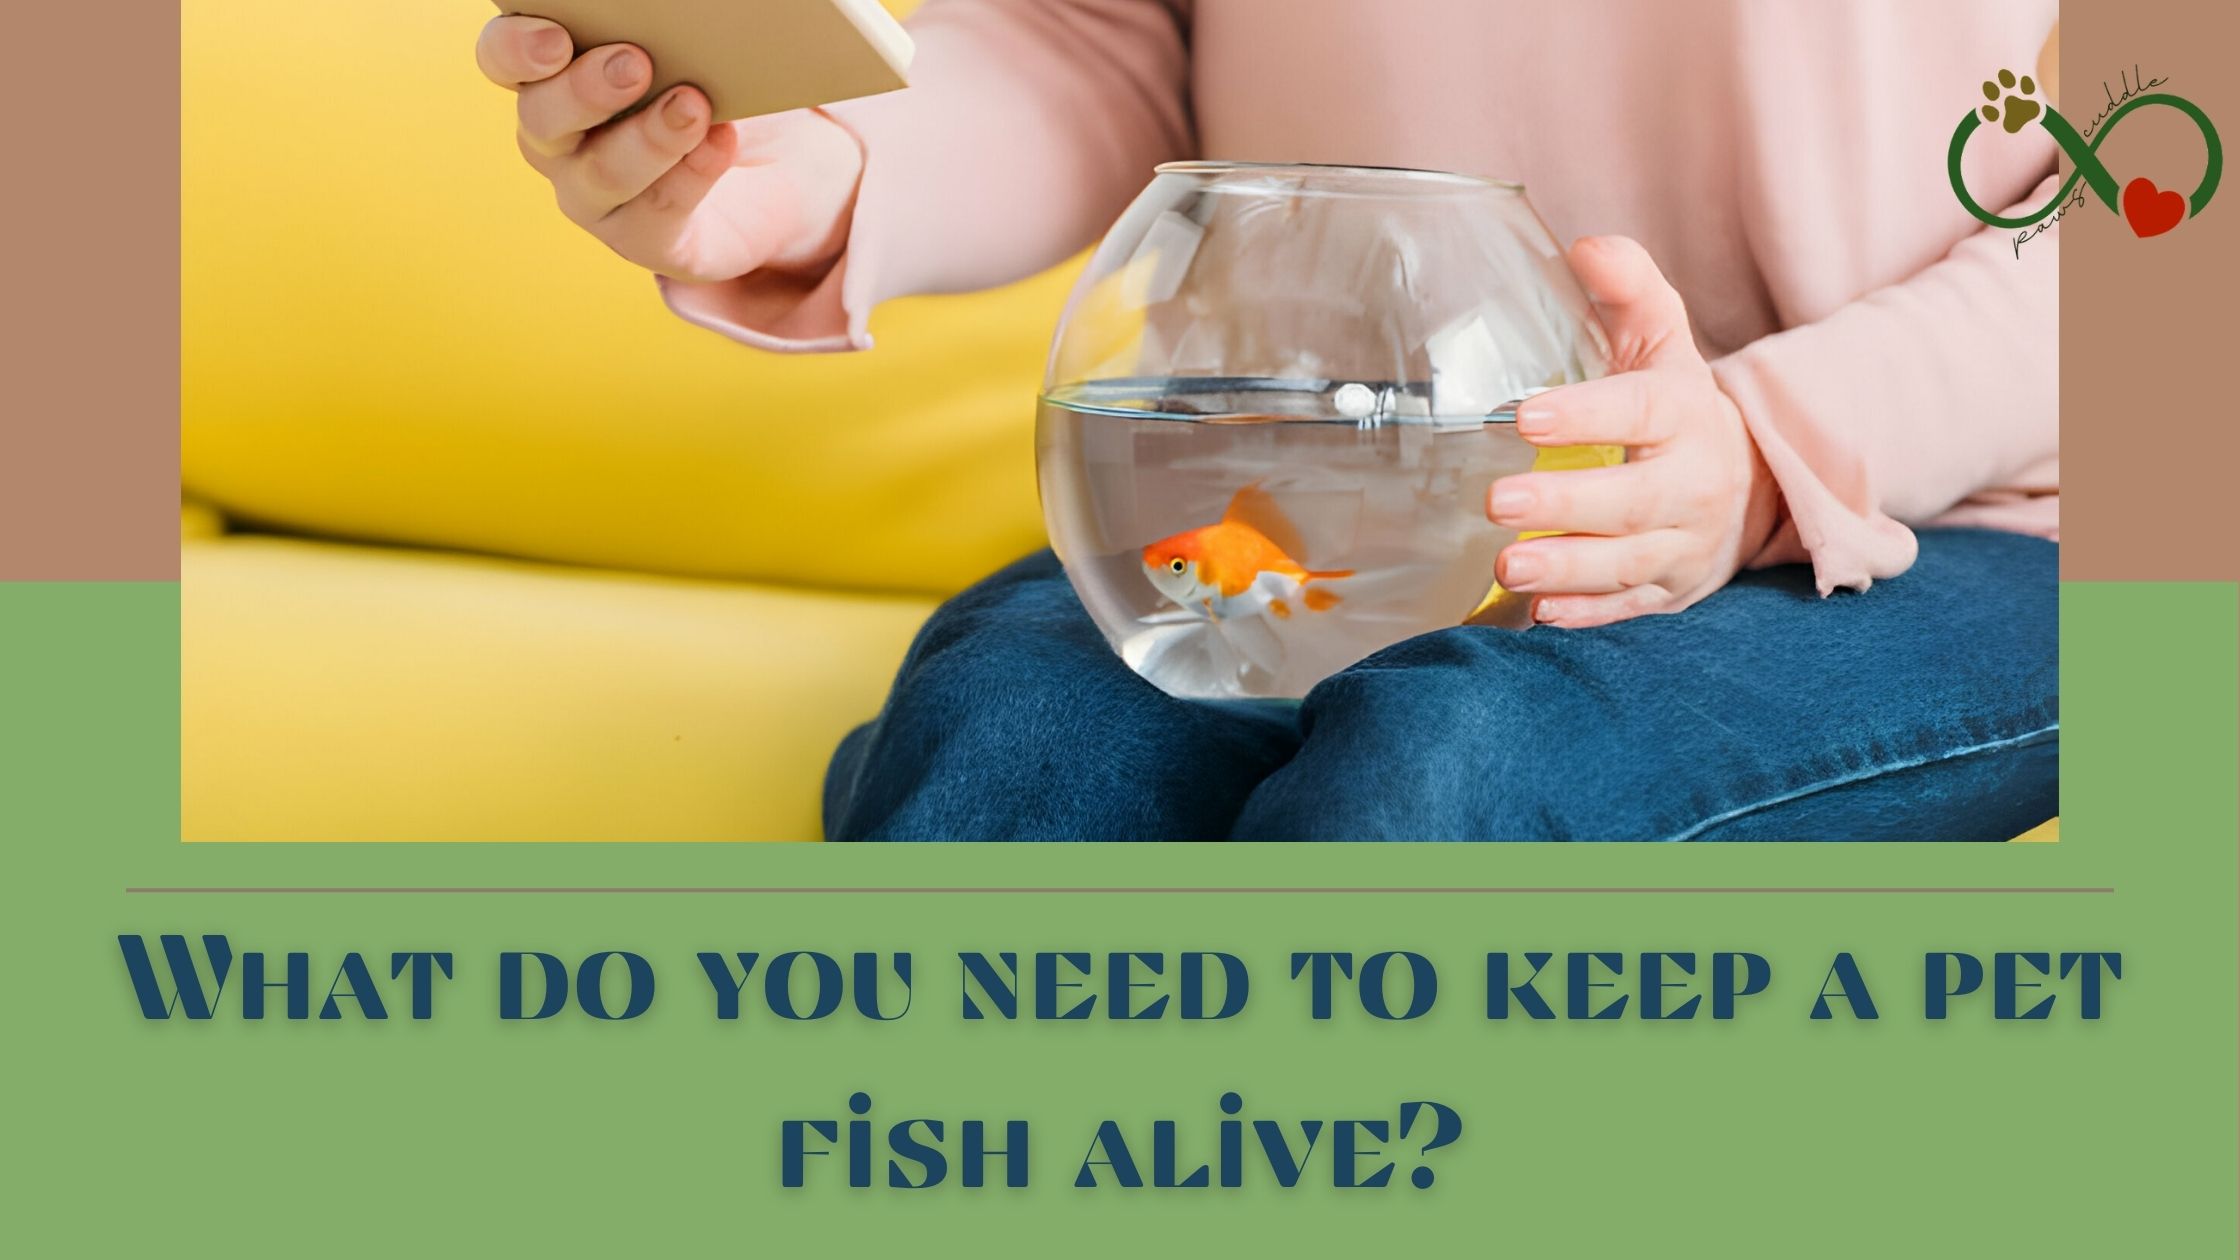 What do you need to keep a pet fish alive?